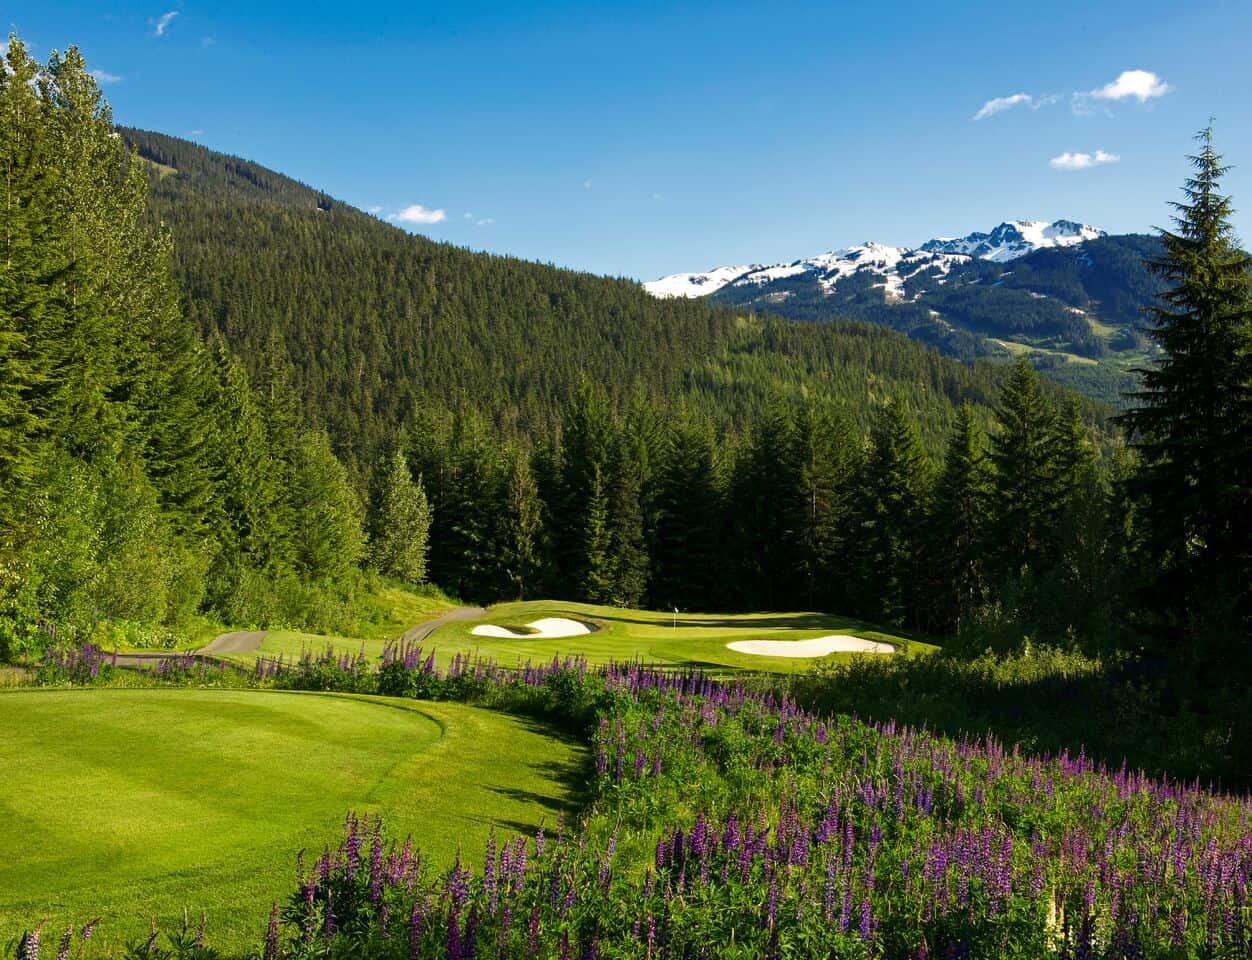 Mountains crest over the top of the fairmont whistler golf course